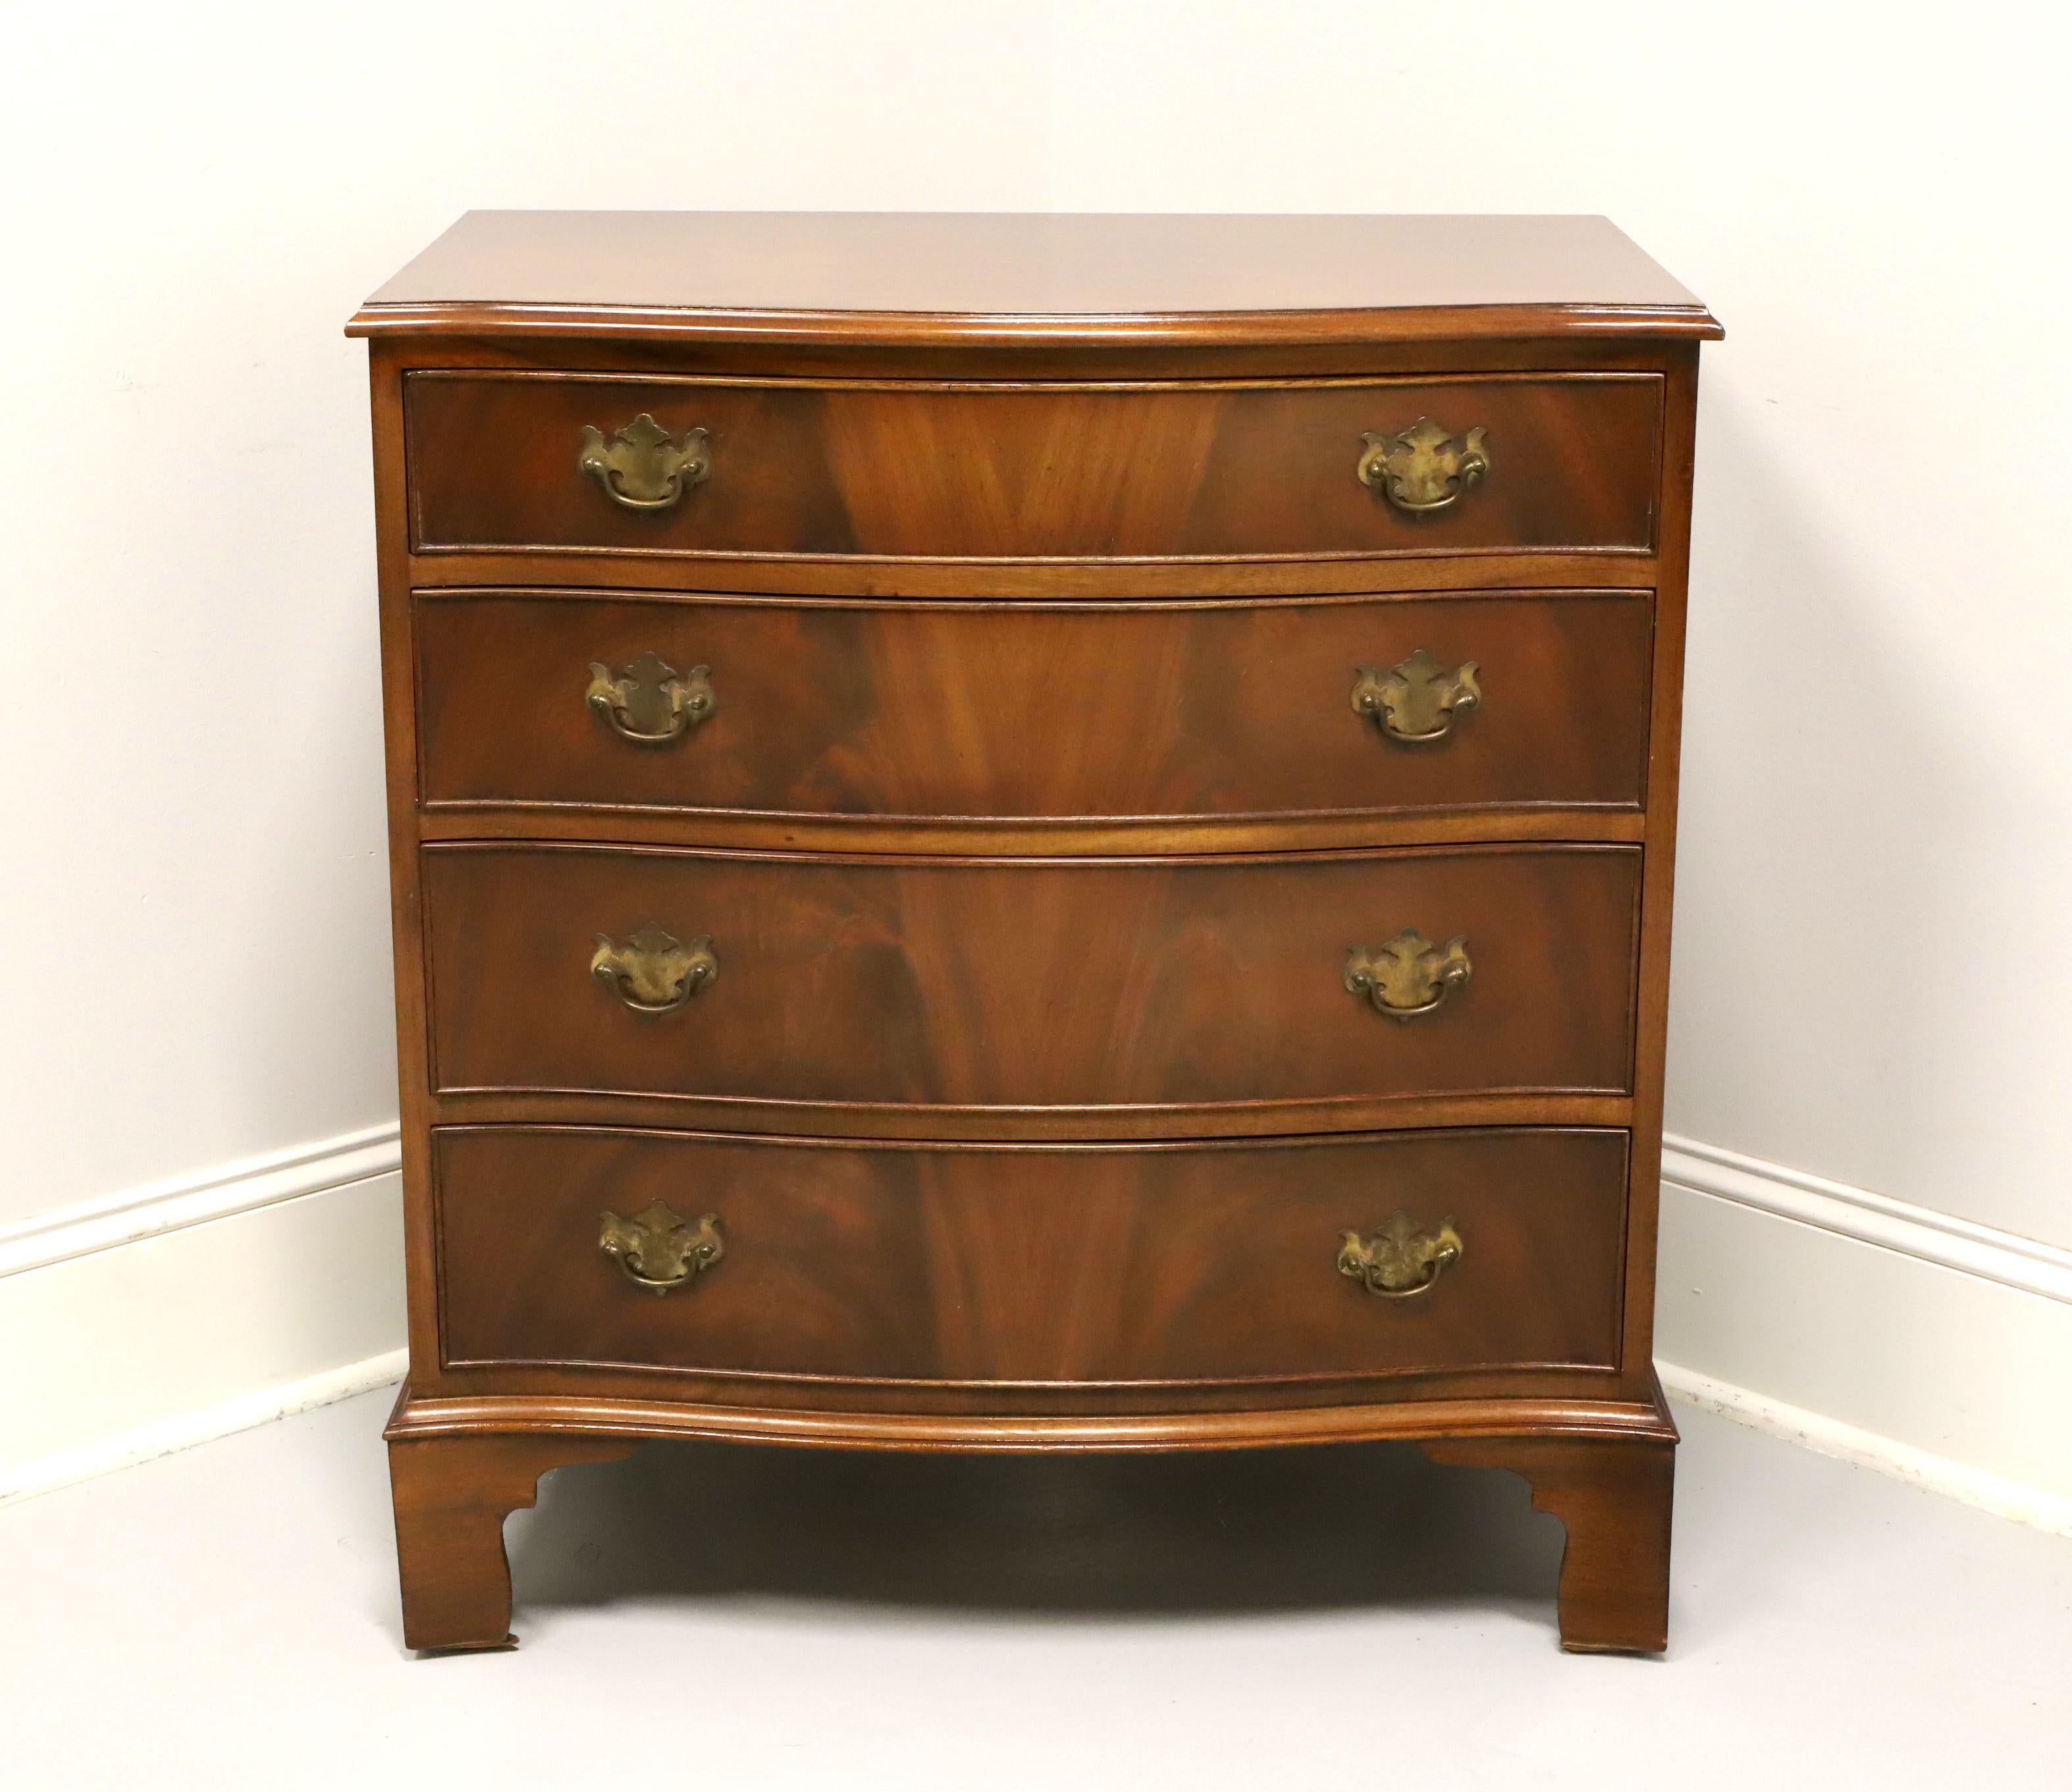 A bachelor chest in the Georgian style, though unmarked, most likely by Bevan Funnell Reprodux. Mahogany with flame mahogany drawer fronts, serpentine front, brass hardware and bracket feet. Features four drawers of dovetail construction. Made in